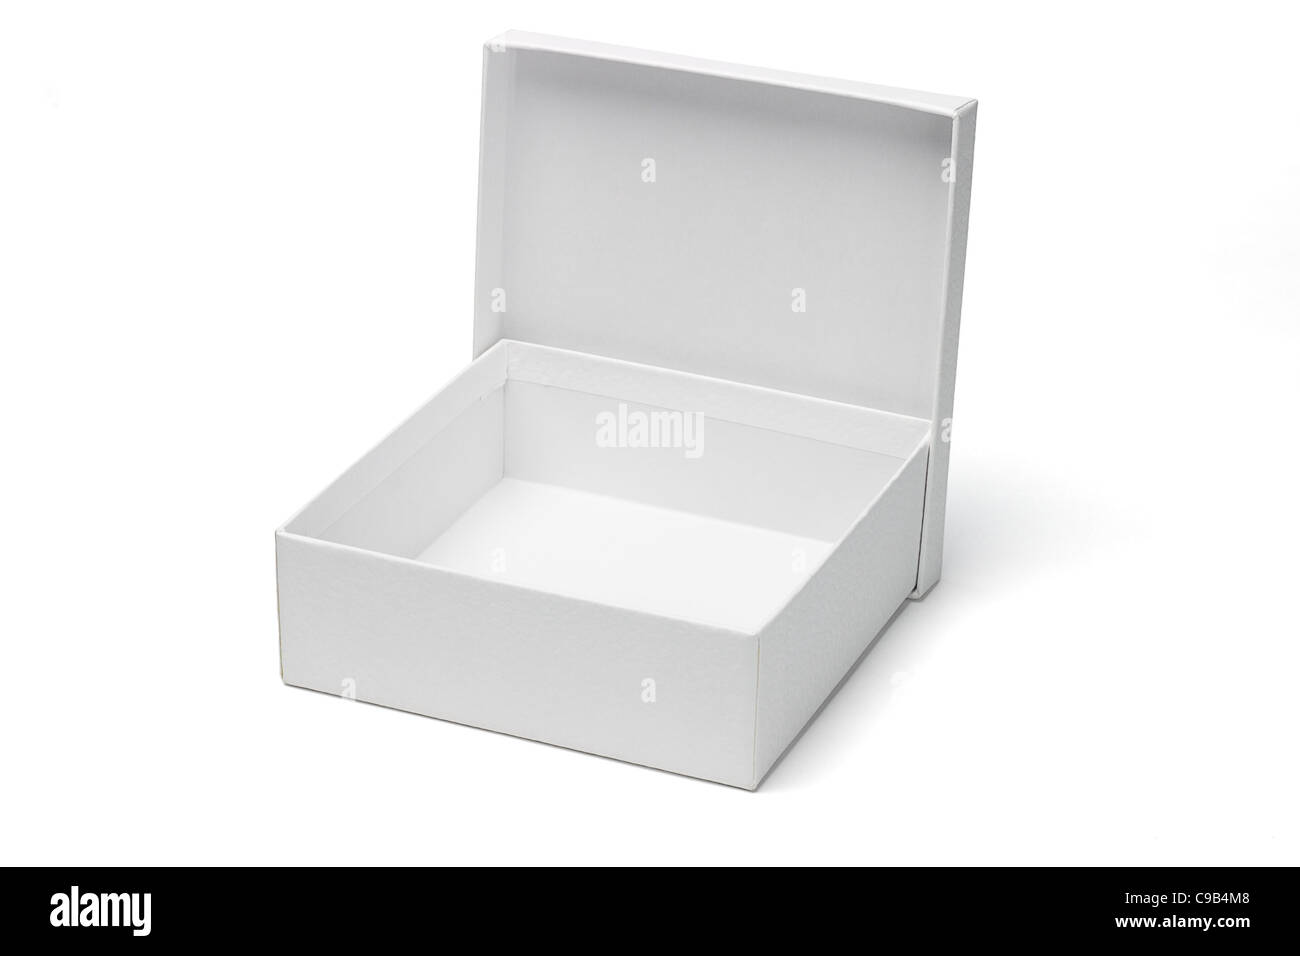 Open empty white gift box with lid on isolated background Stock Photo